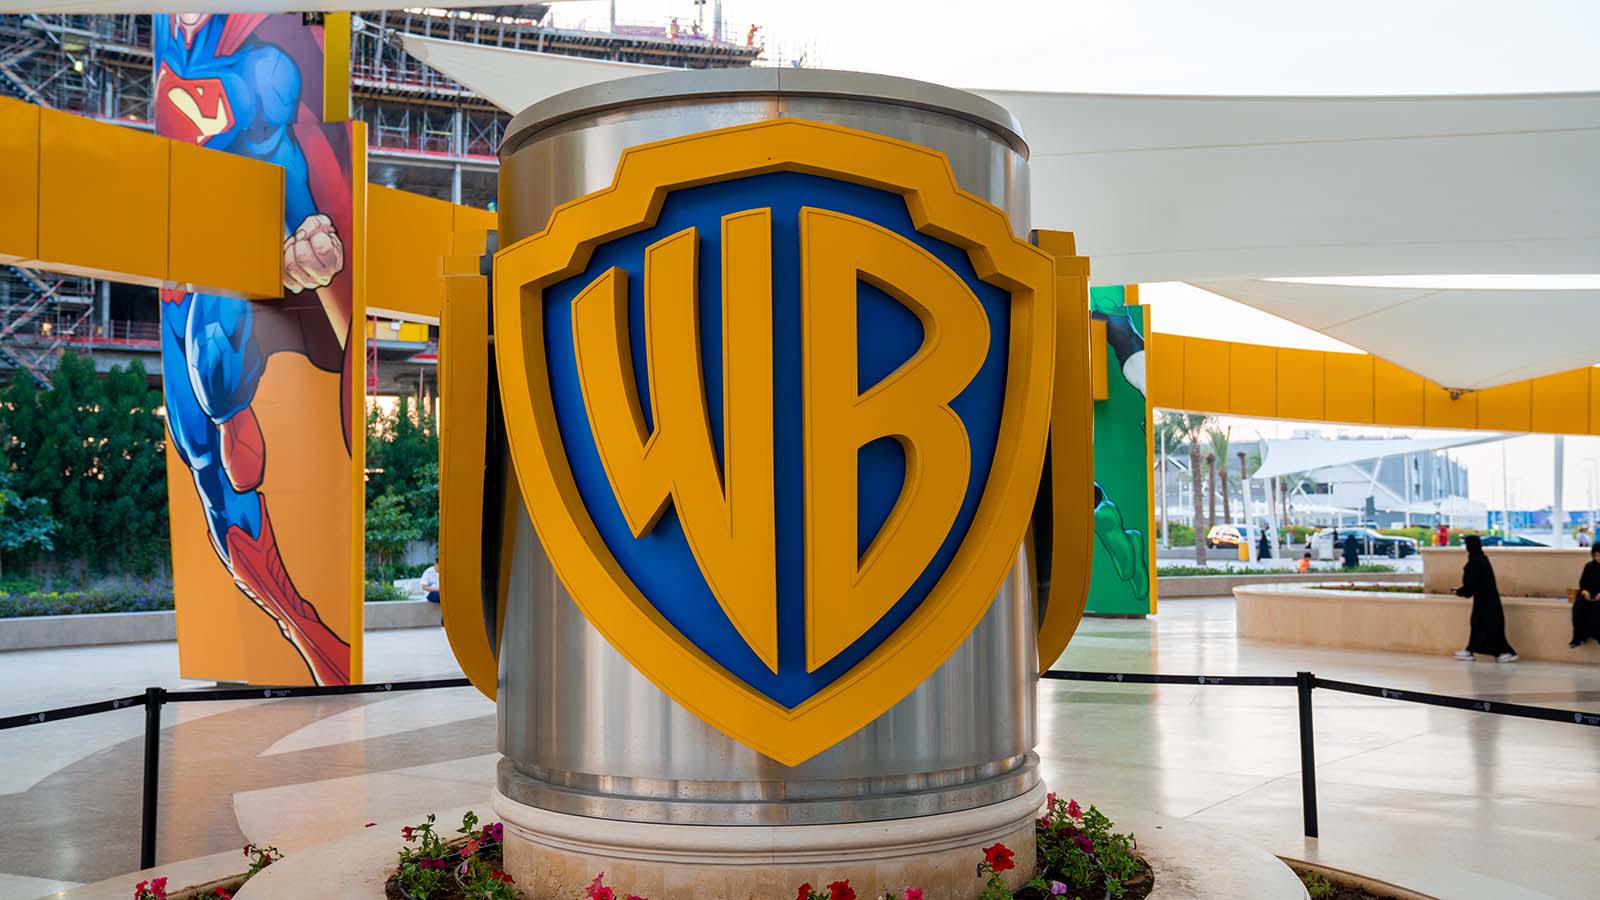 Why Warner Bros. Is Discovery (WBD) down 14% today?